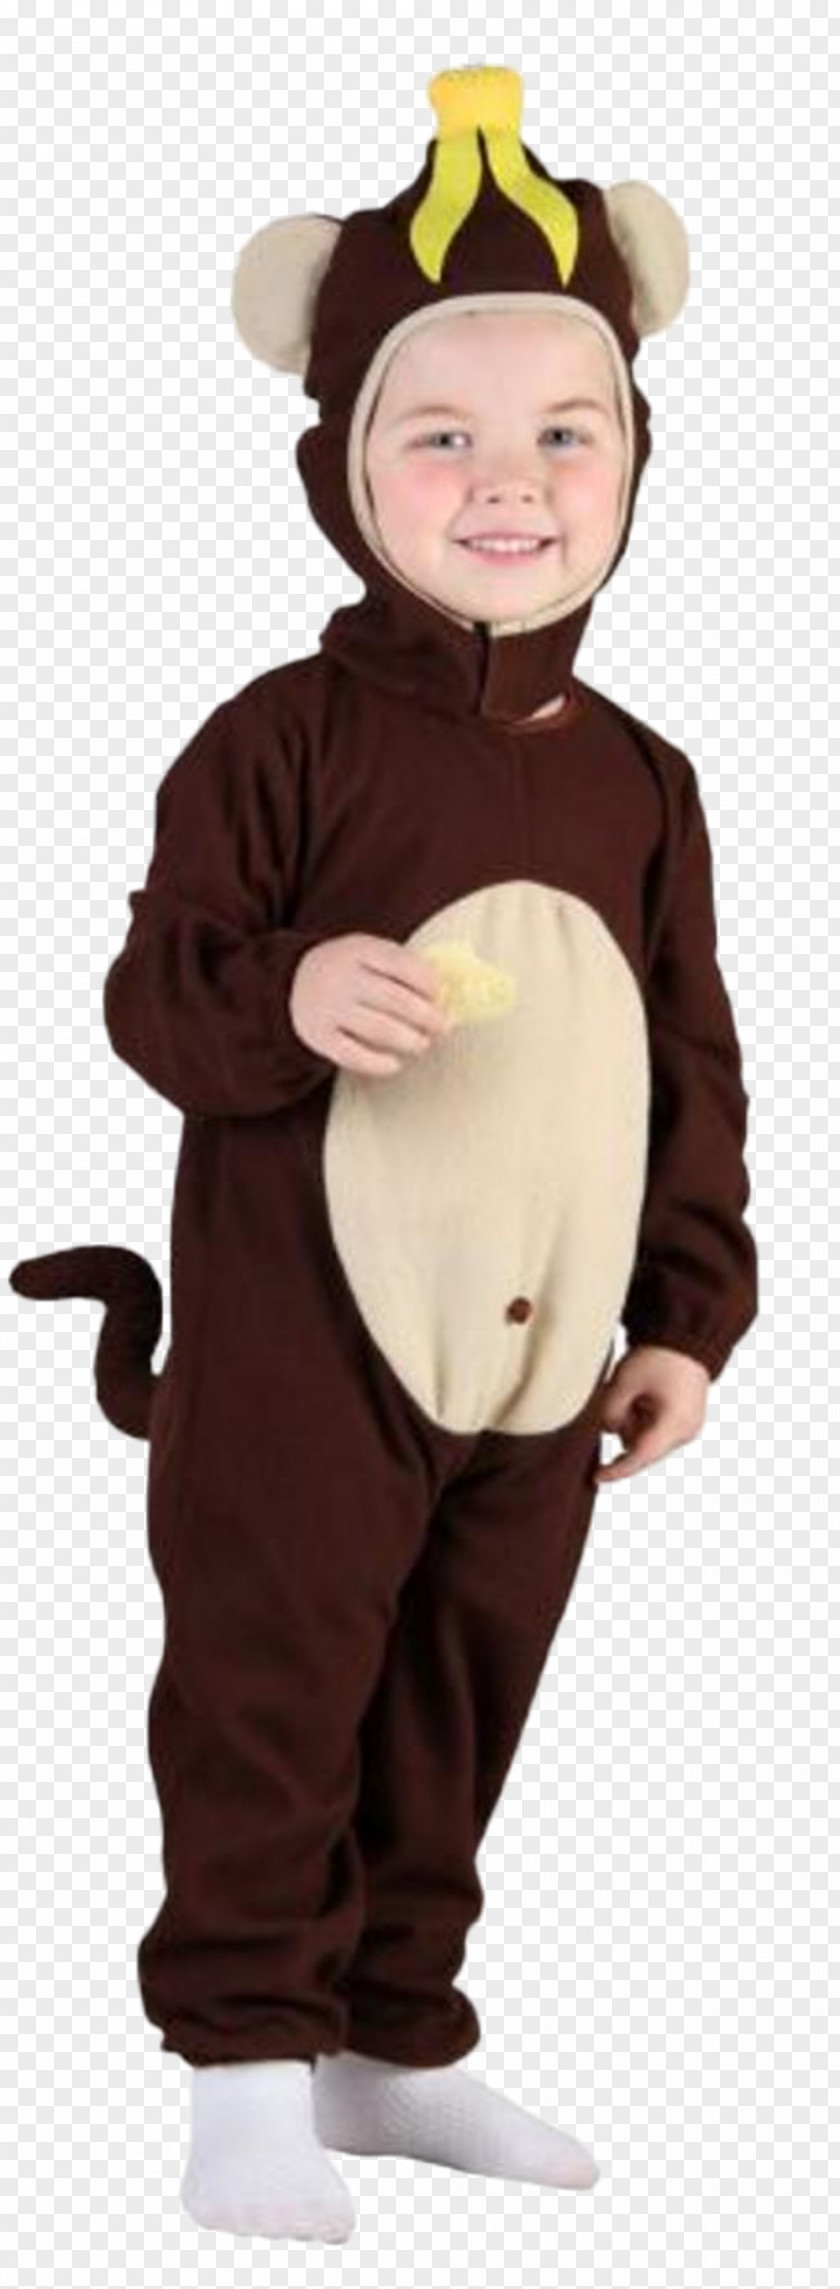 Child Costume Party Toddler Boy PNG